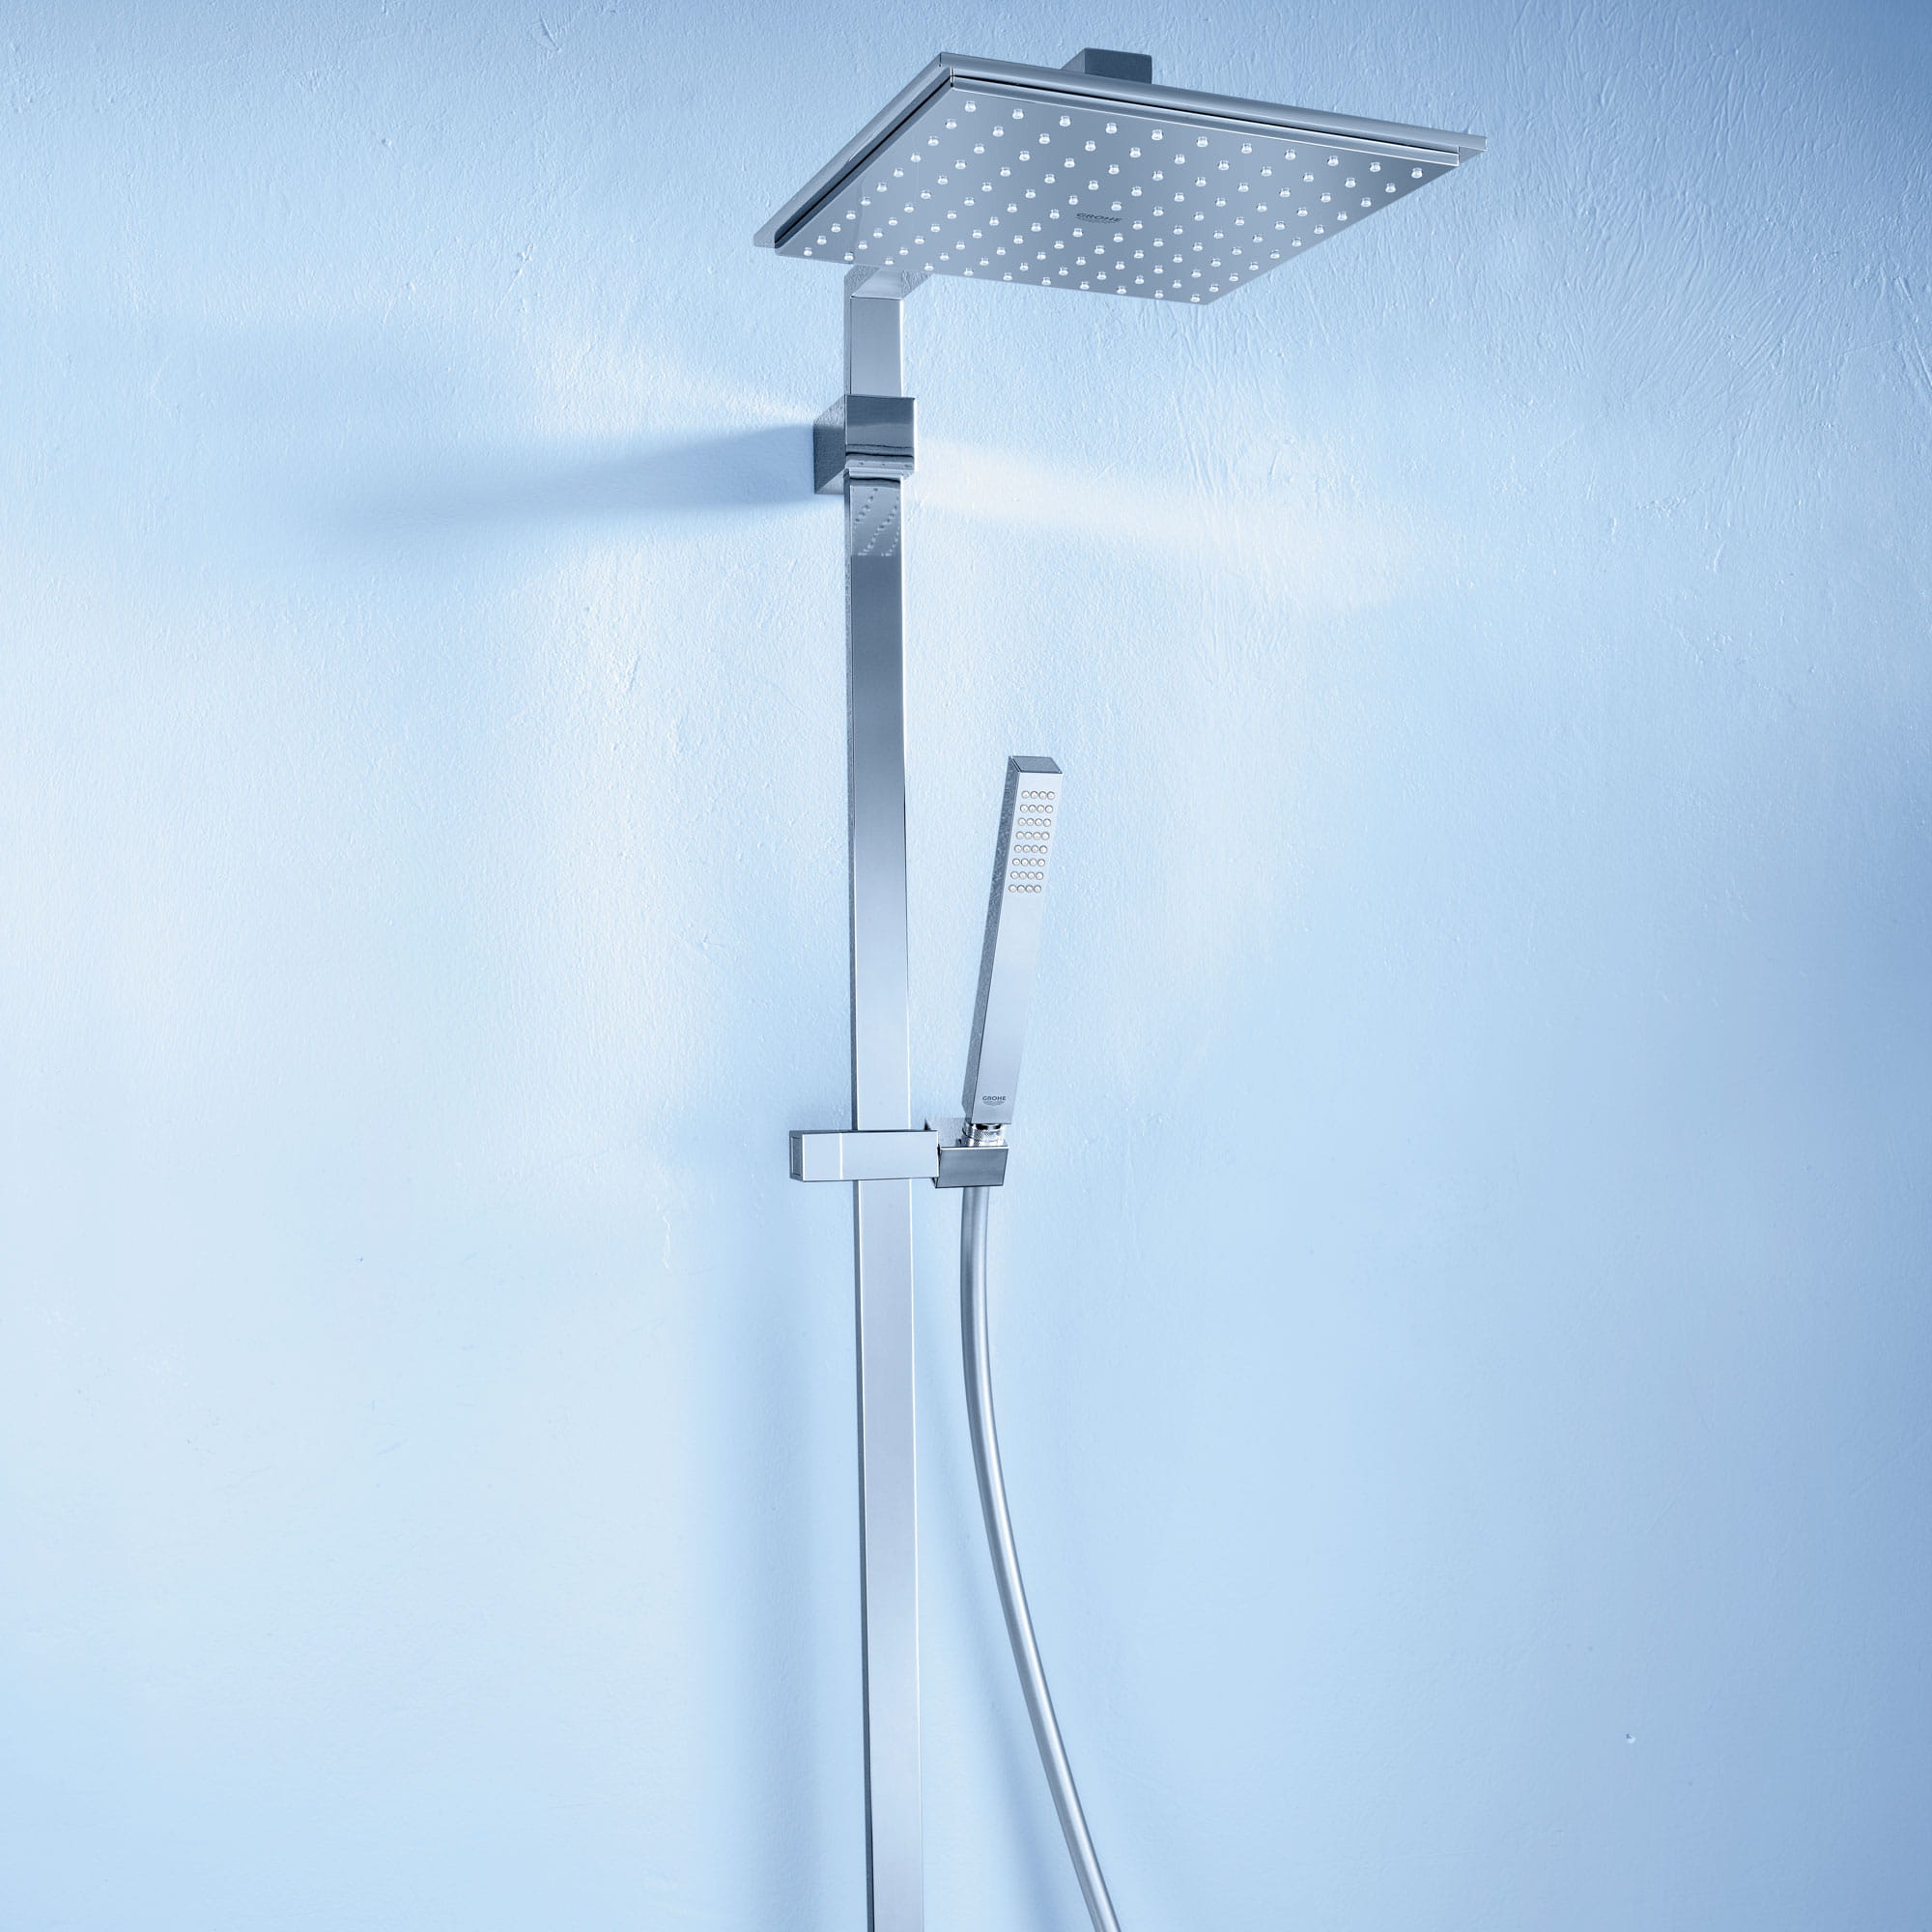 Grohe shower in a light blue bathroom.